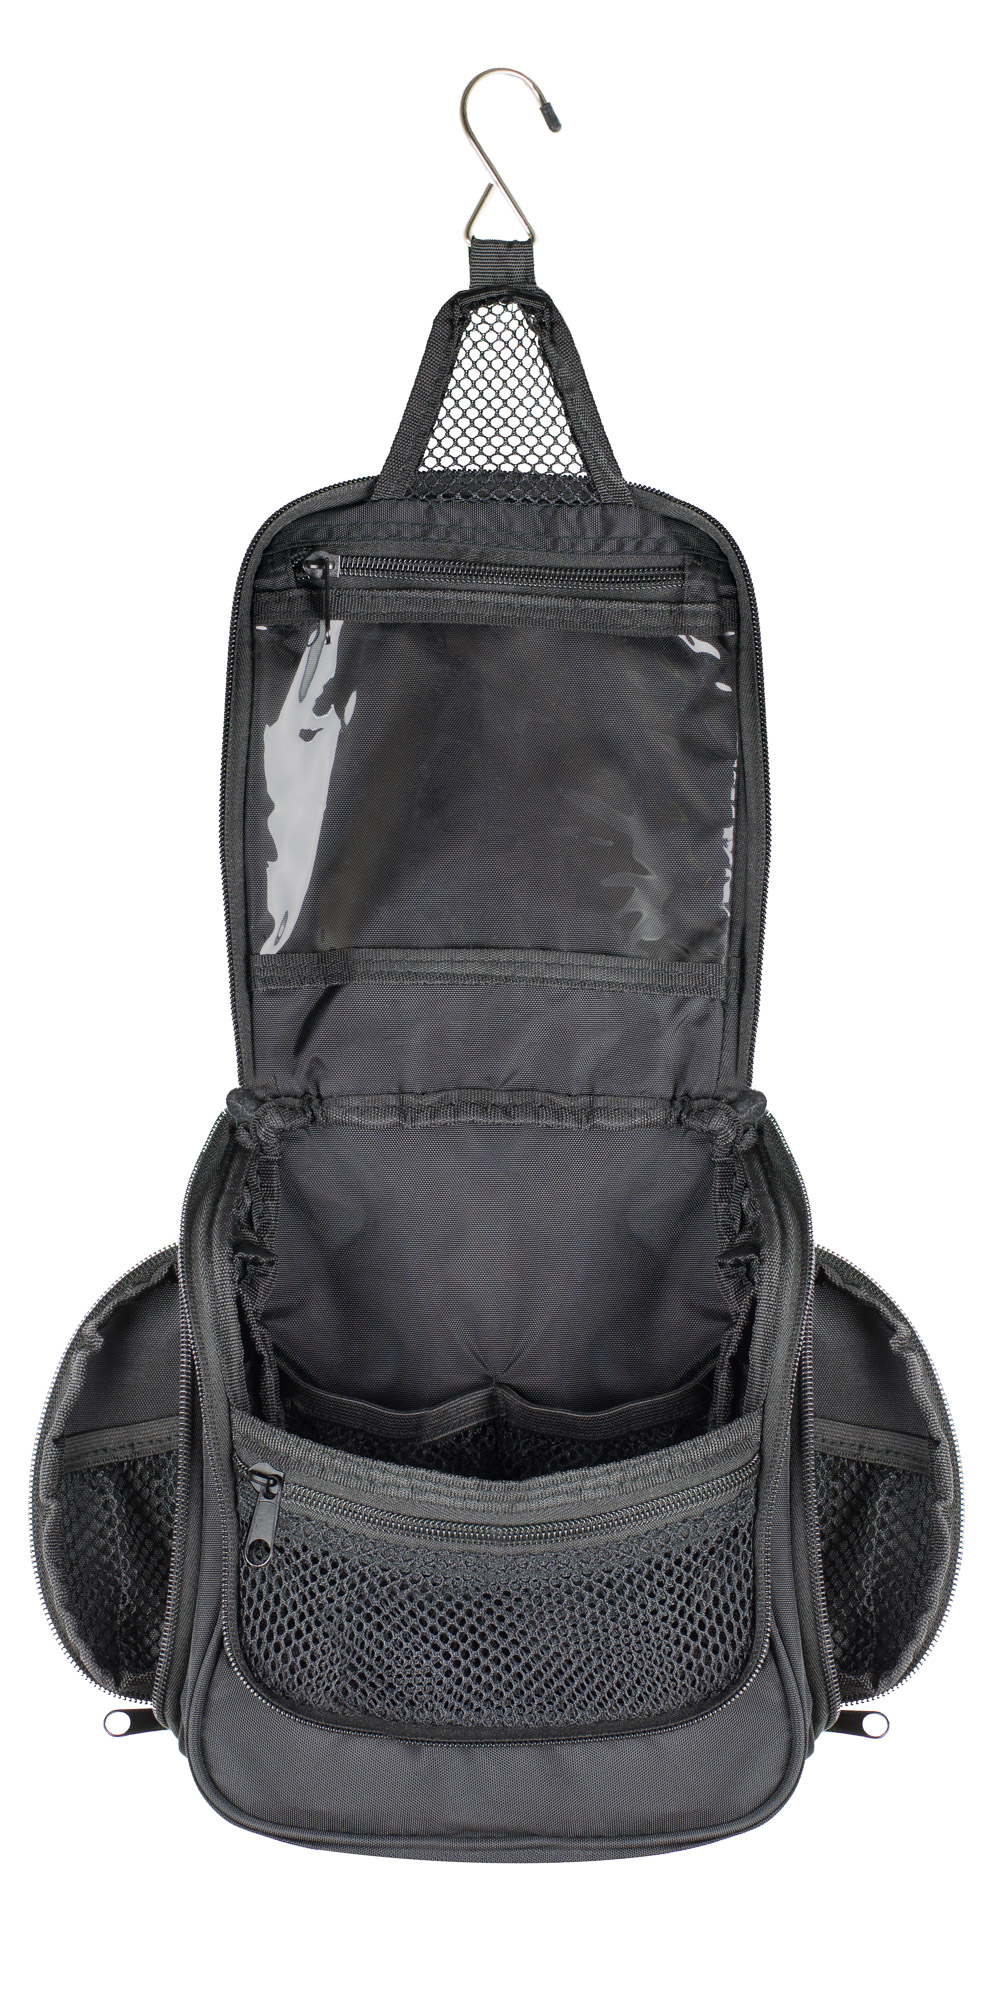 NeatPack Compact Hanging Toiletry Bag, Black - image 5 of 10